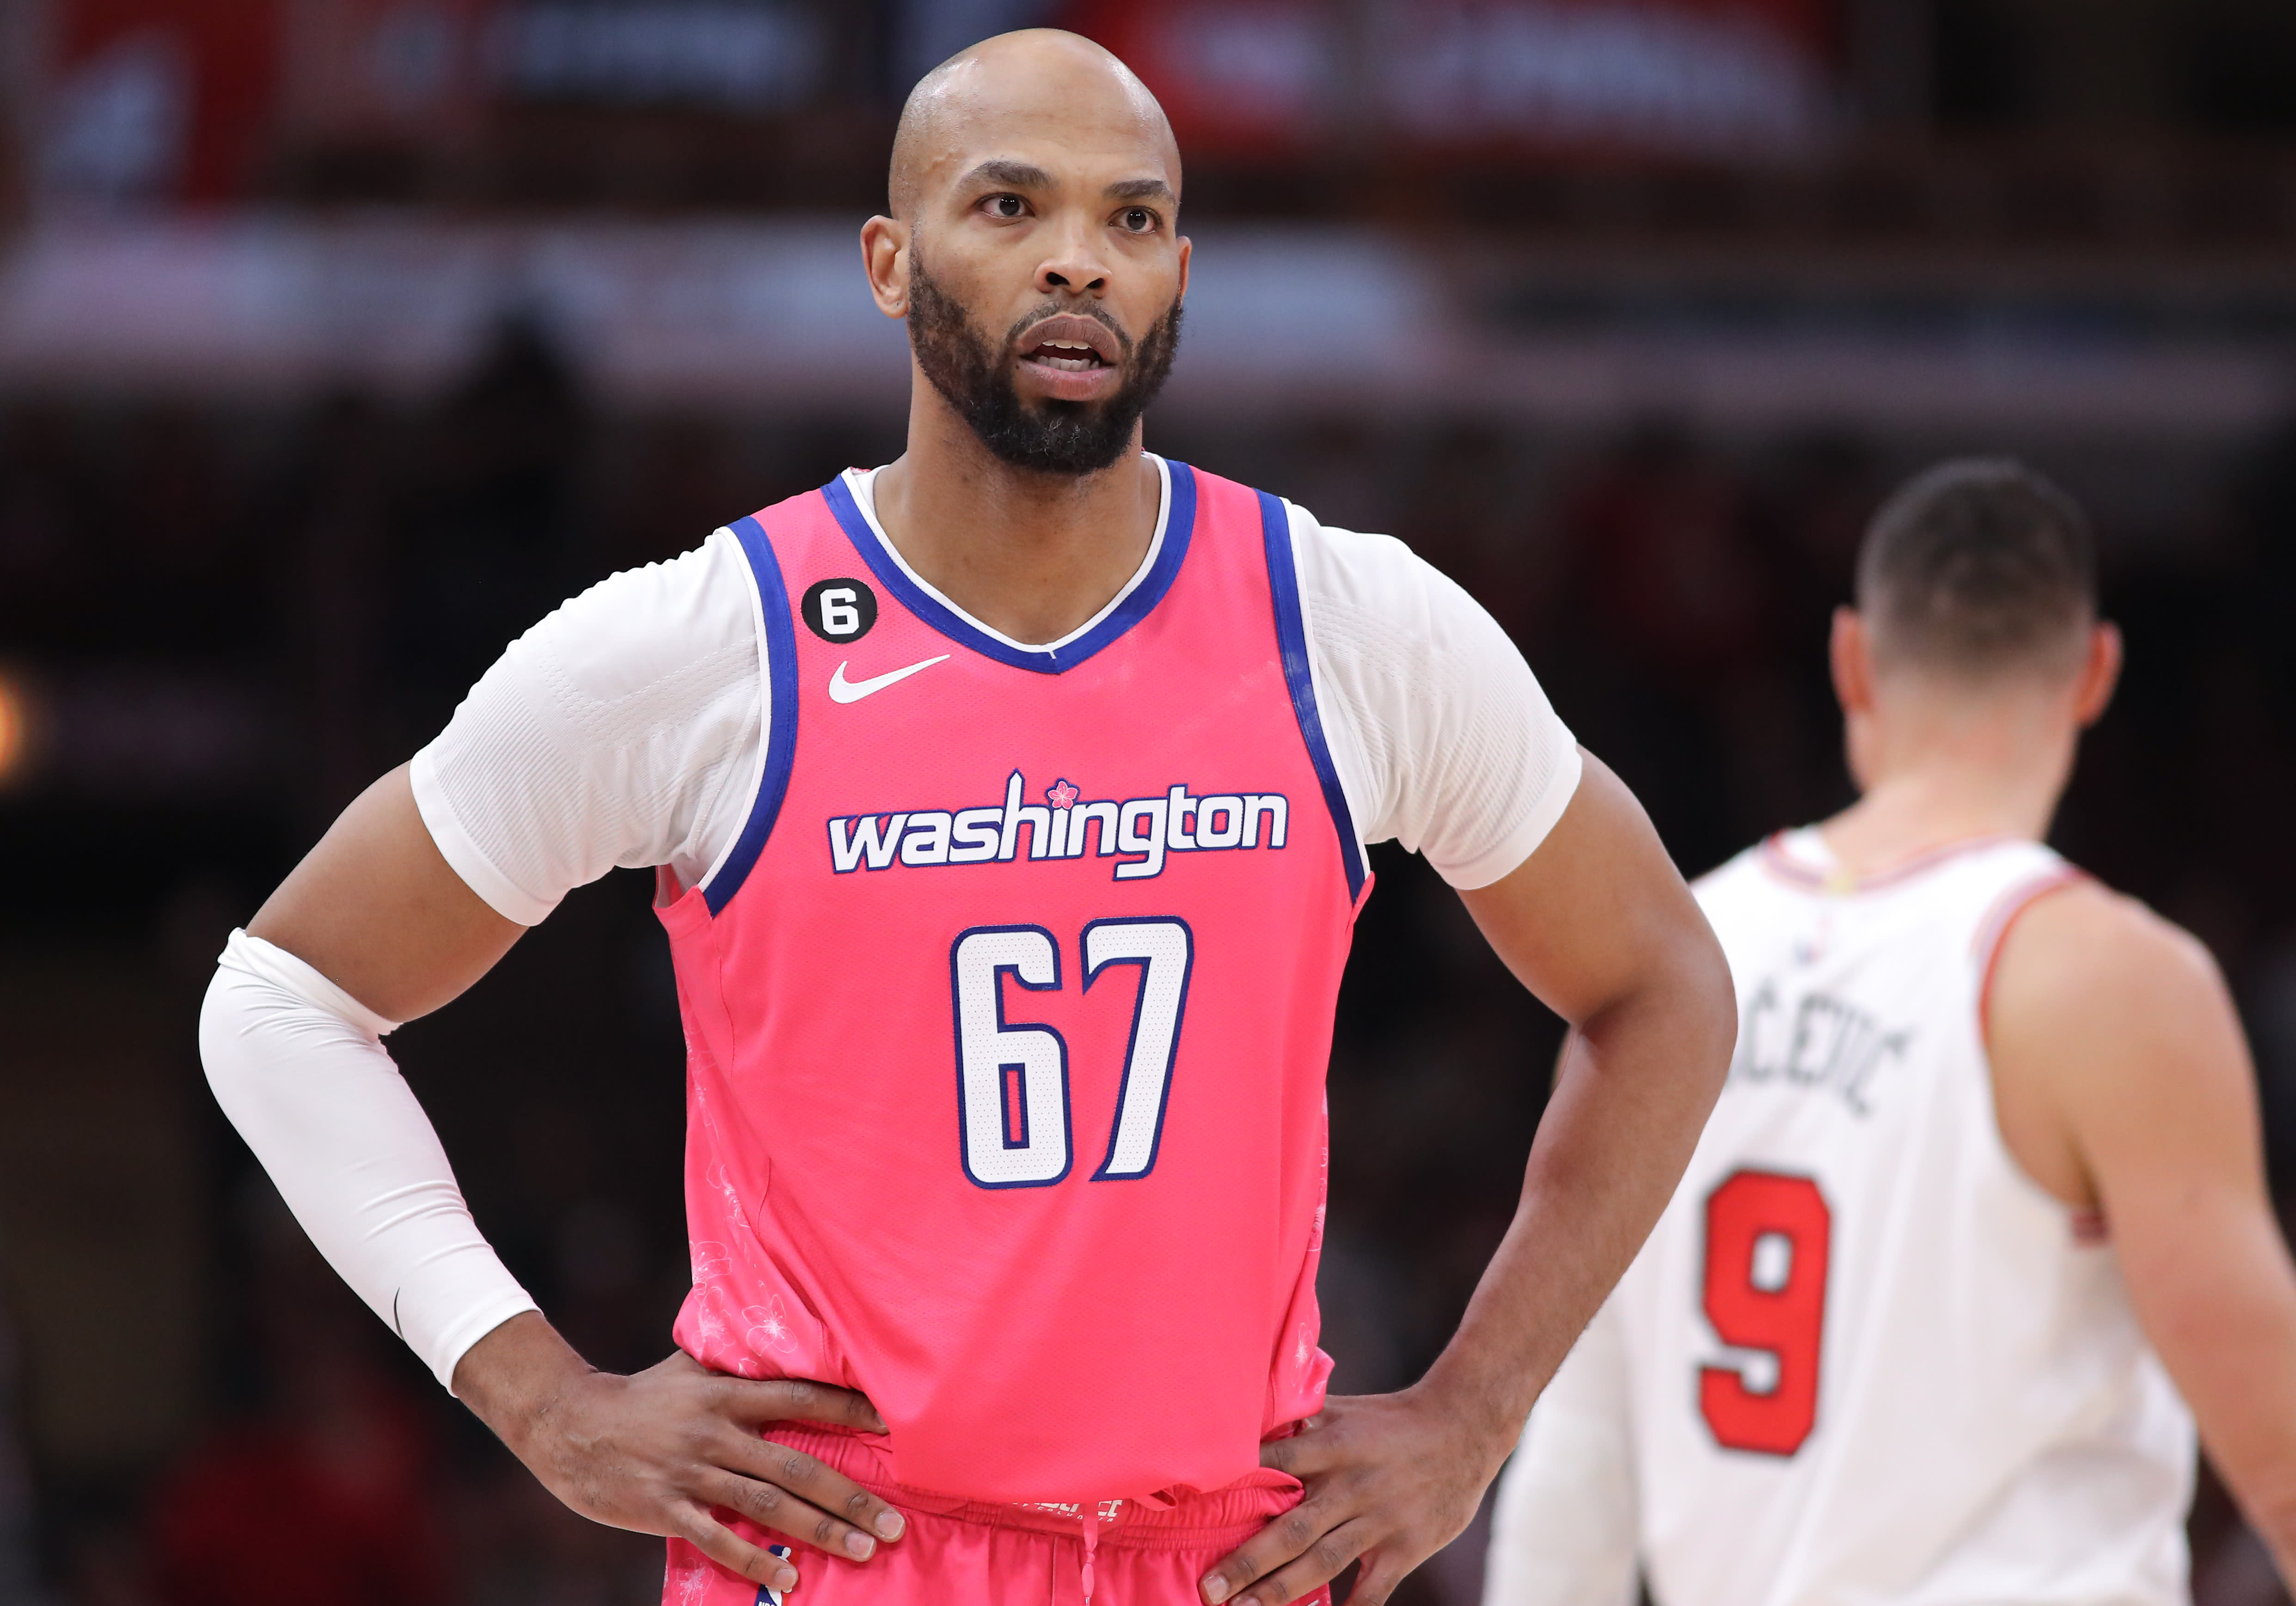 Knicks signing Taj Gibson after Mitchell Robinson’s ankle injury in latest reunion with coach Tom Thibodeau